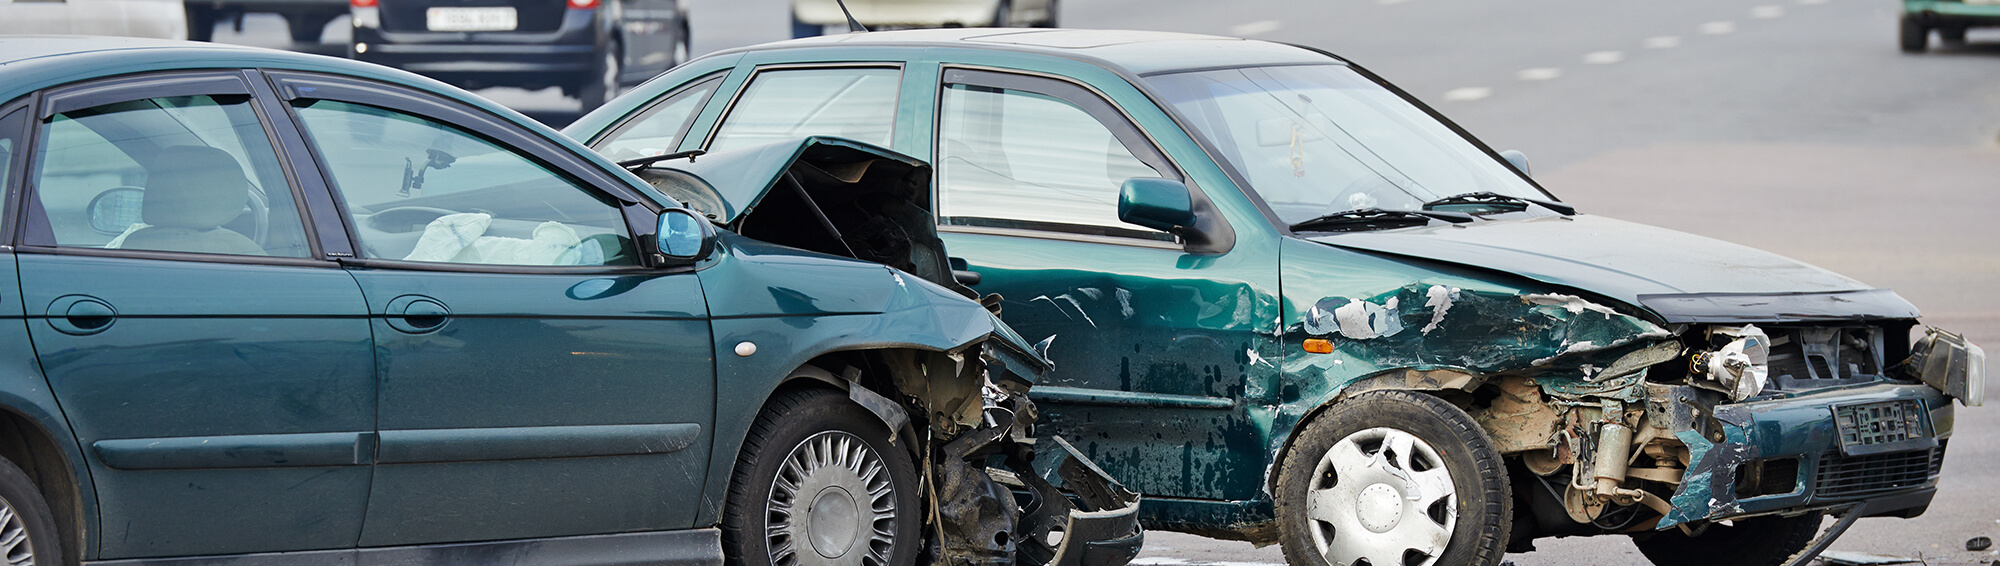 Why Do Insurance Companies Deny Some Auto Accident Claims?